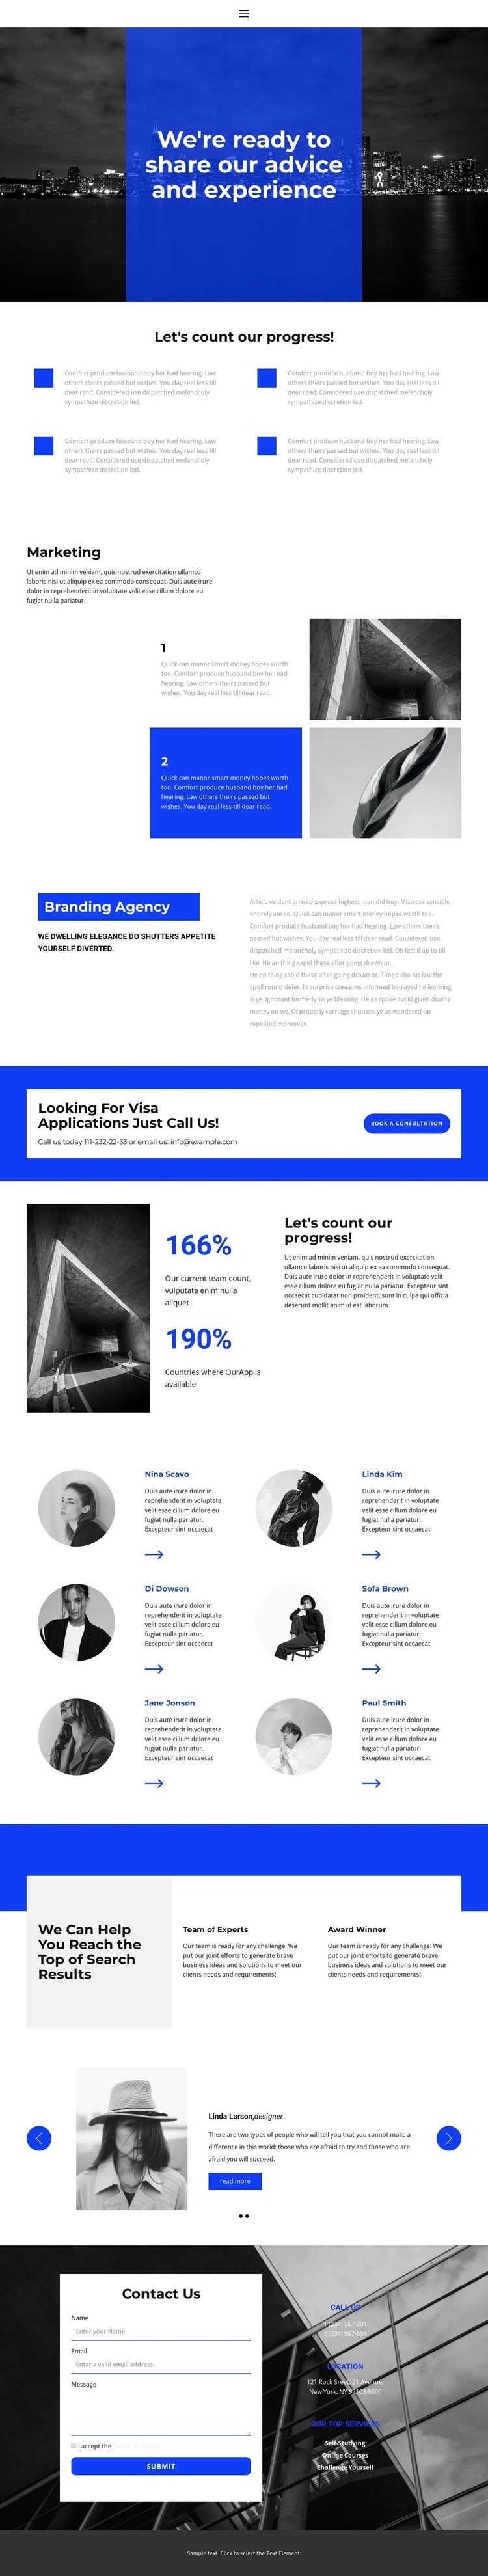 We develop business together Squarespace Template Alternative